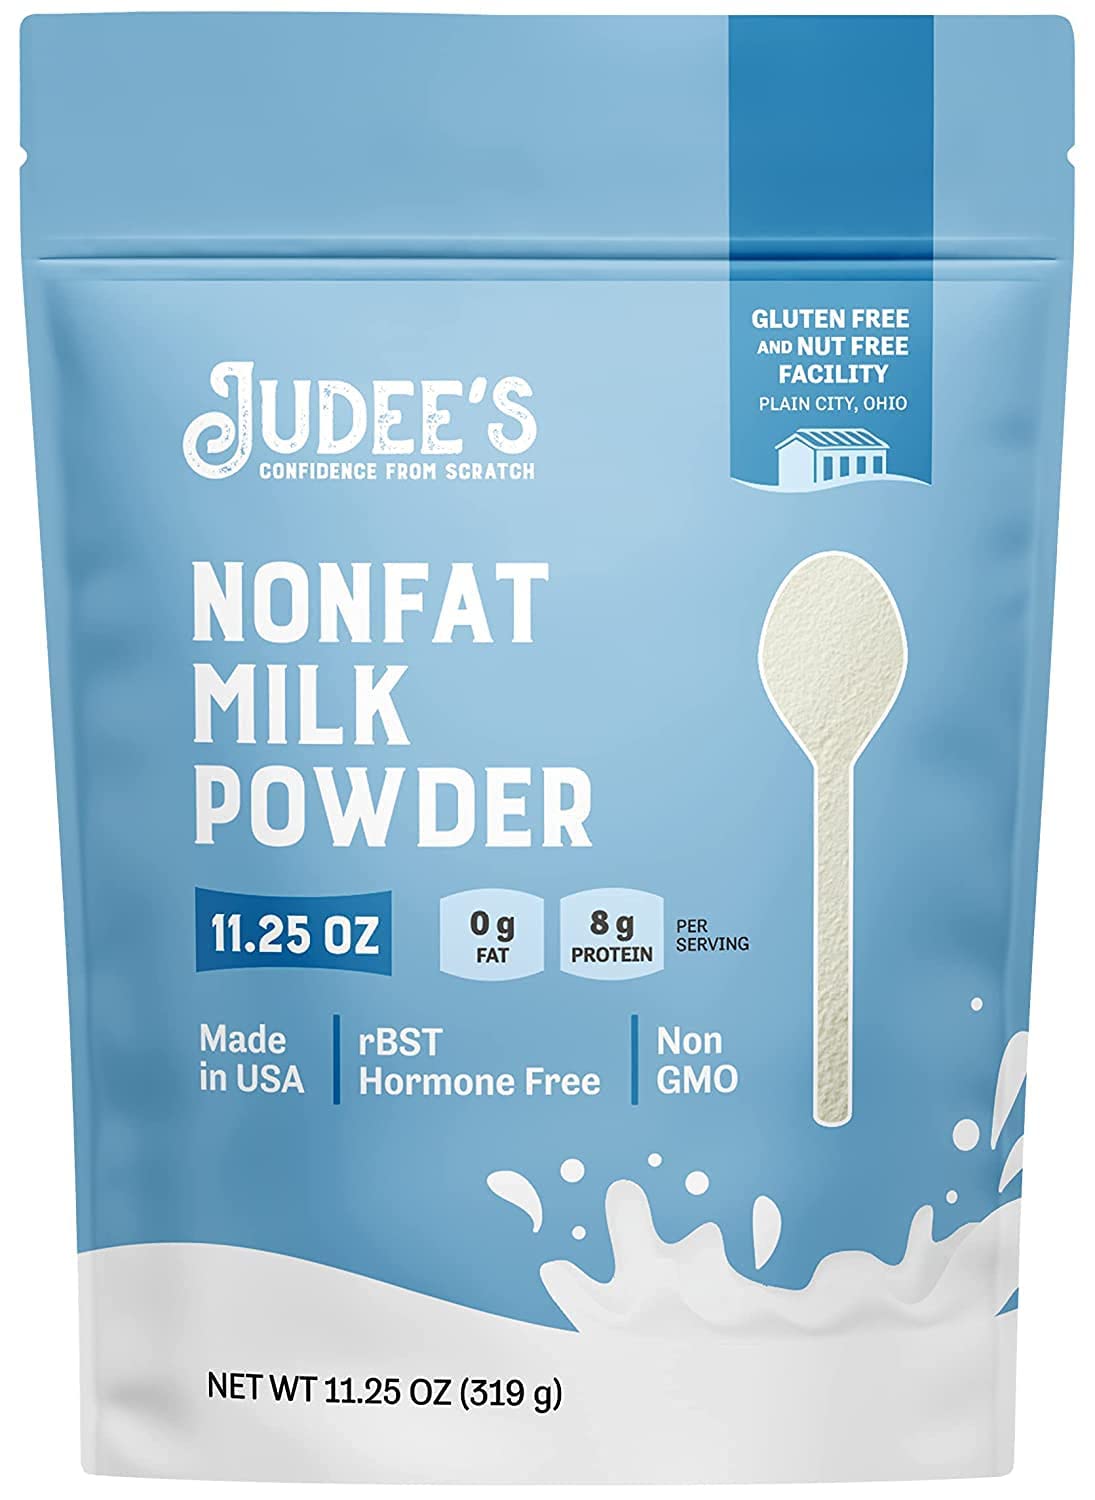 Judee’s Non-Fat Milk Powder 11.25 oz - 100% Non-GMO, Keto-Friendly - rBST Hormone-Free, Gluten-Free and Nut-Free - Good Source of Protein and Calcium - Made in USA